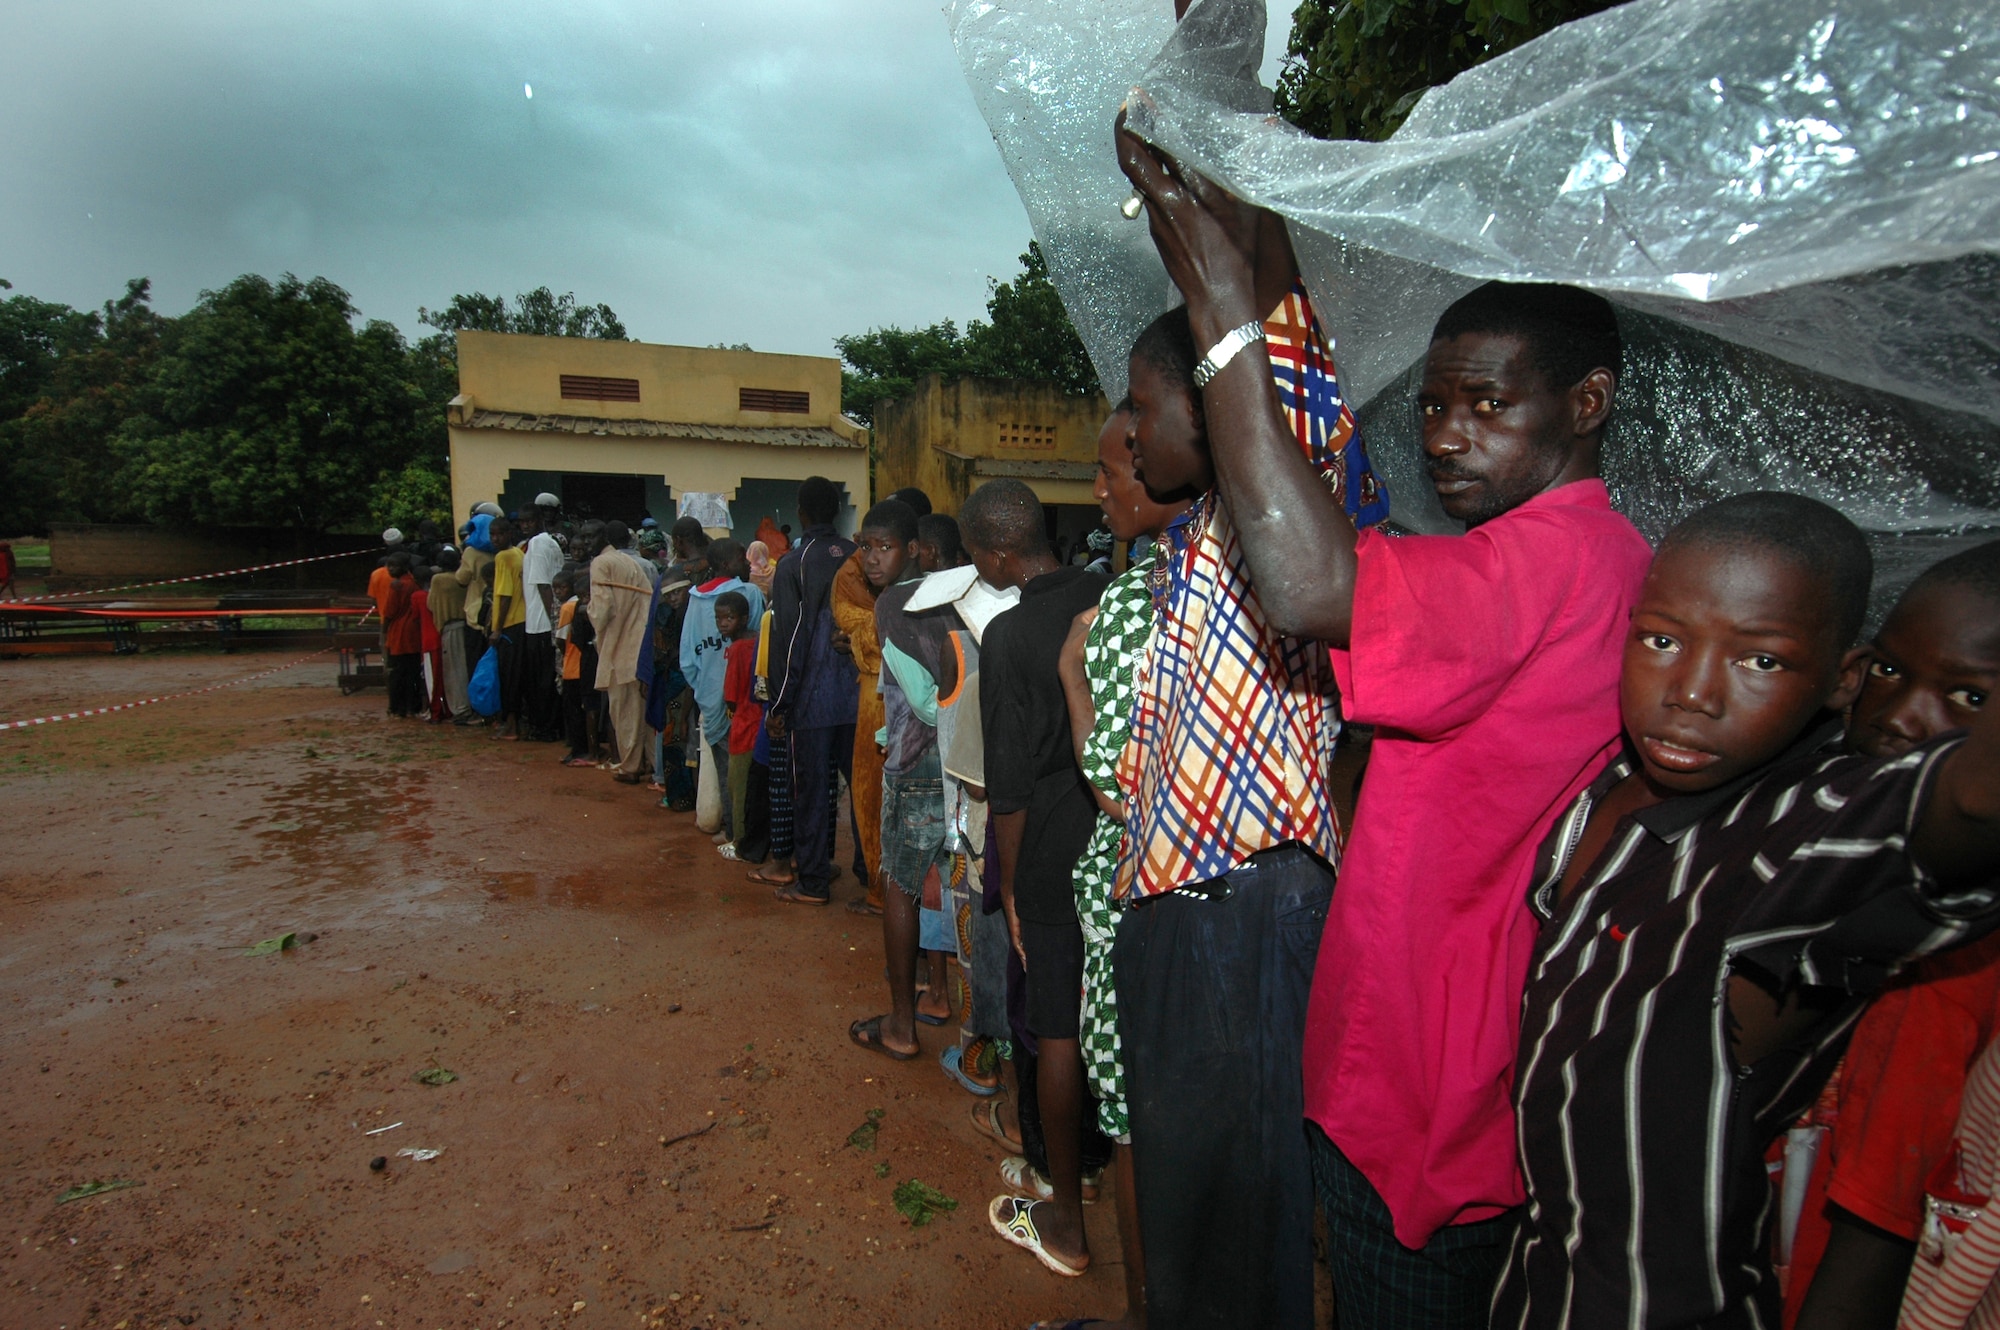 Hundreds of Malians wait in the rain to be seen by doctors during MEDFLAG 08, July 22, 2008. While deployed in support of MEDFLAG 08, medical personnel traveled to four villages near Bamako to provide free clinics for the local population. (U.S. Air Force photo/Senior Airman Justin Weaver)